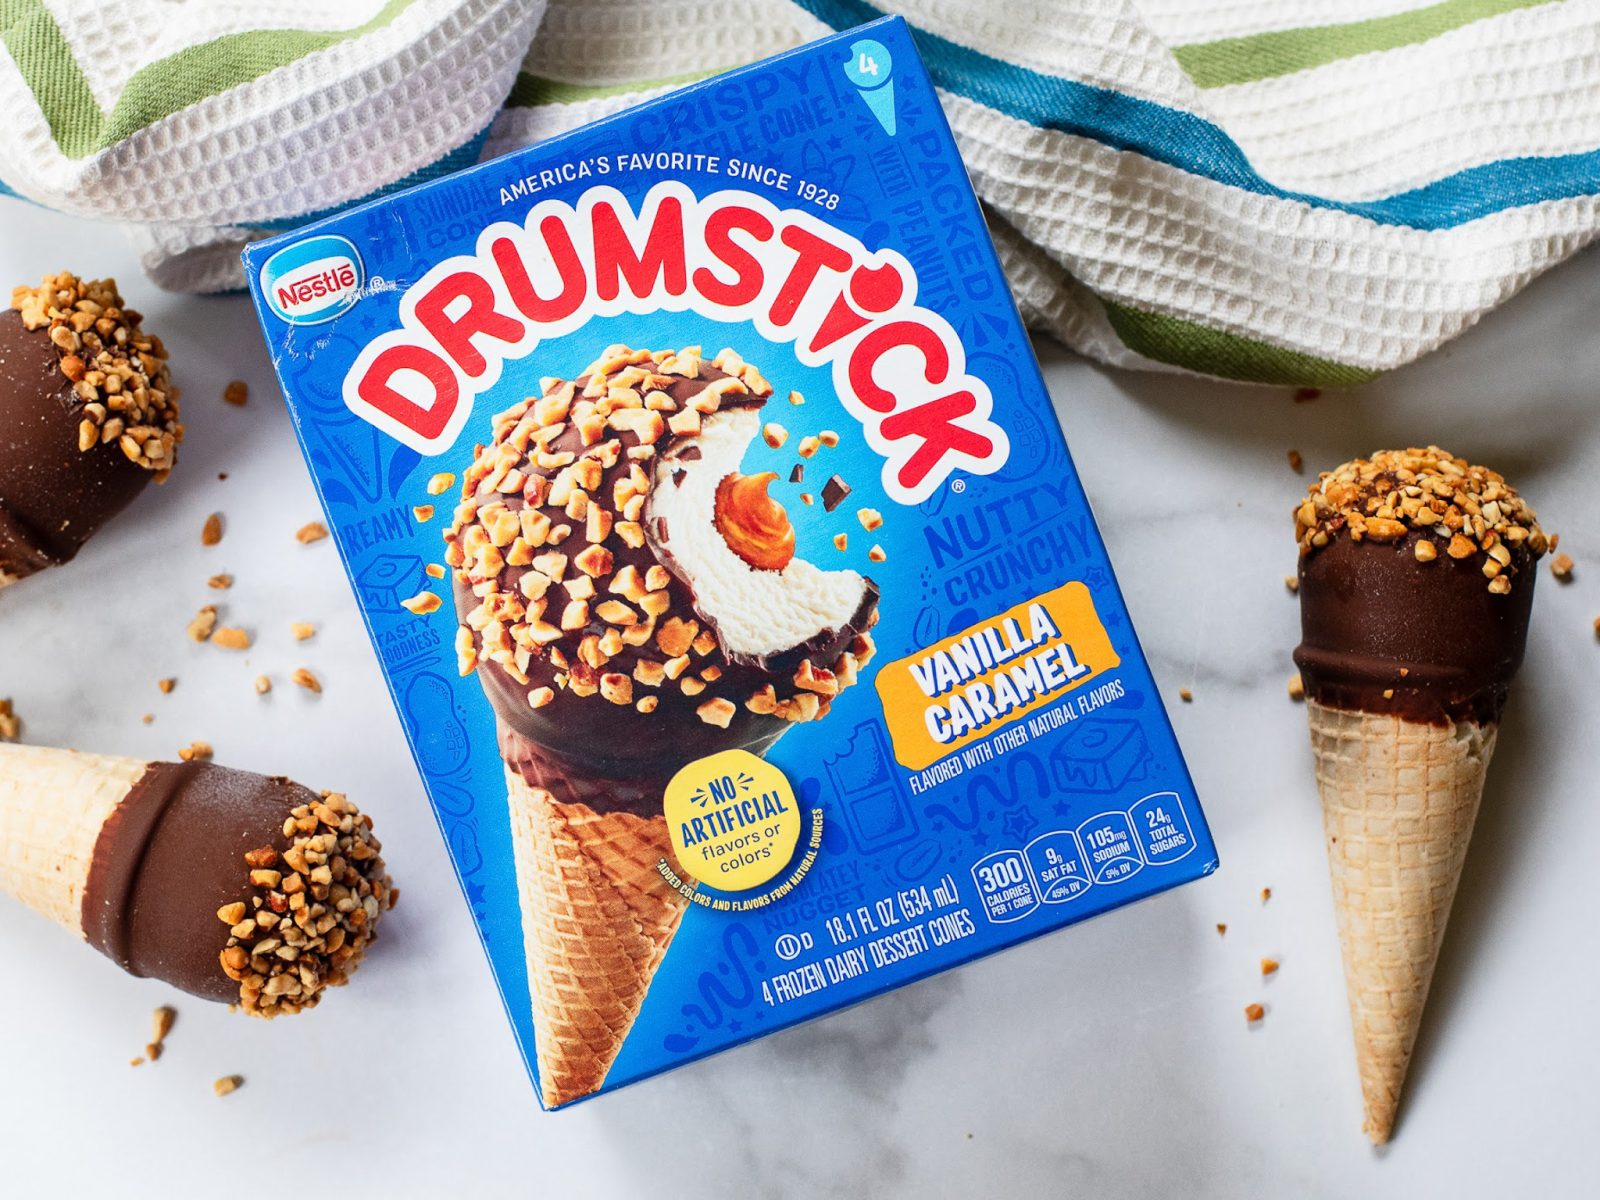 Pick Up Nestle Drumstick Cones 4-Count Boxes For Just $1.75 At Publix